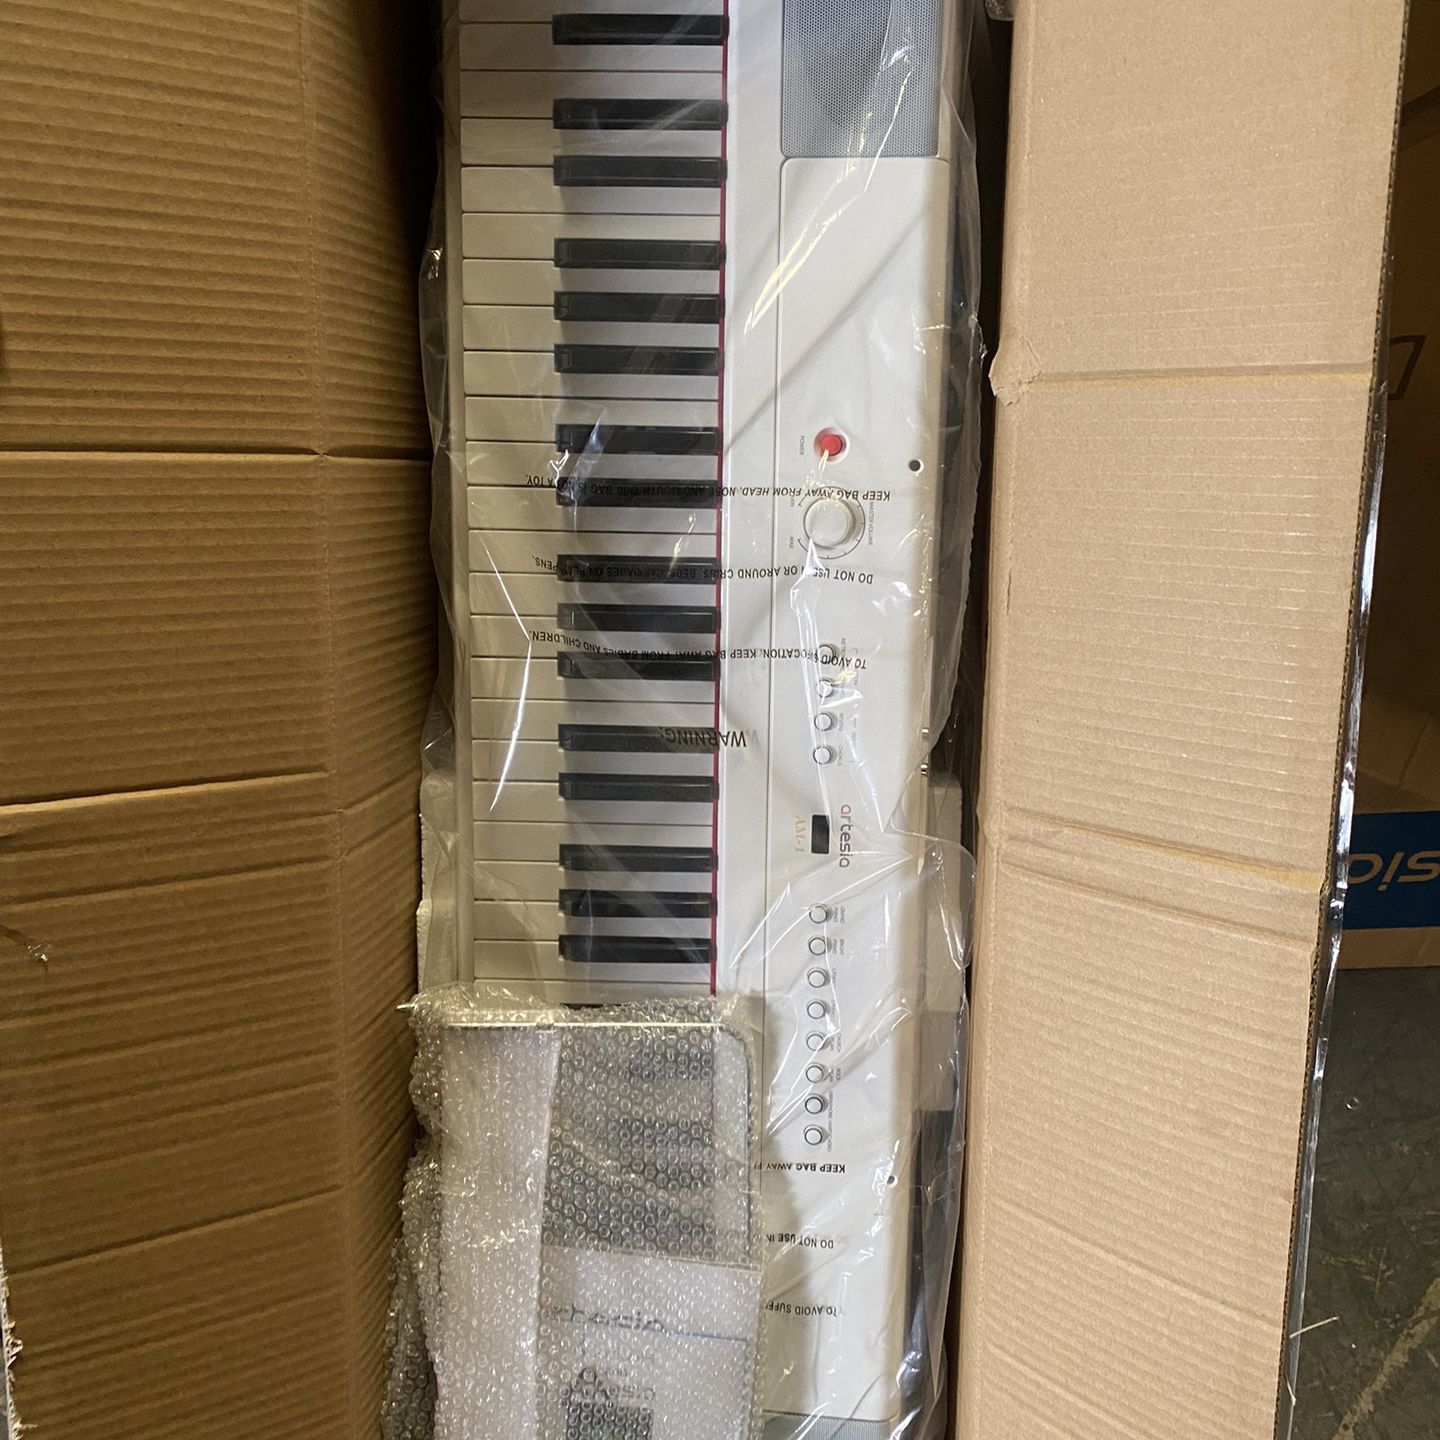 AM-1 Digital Piano For Sale!!!